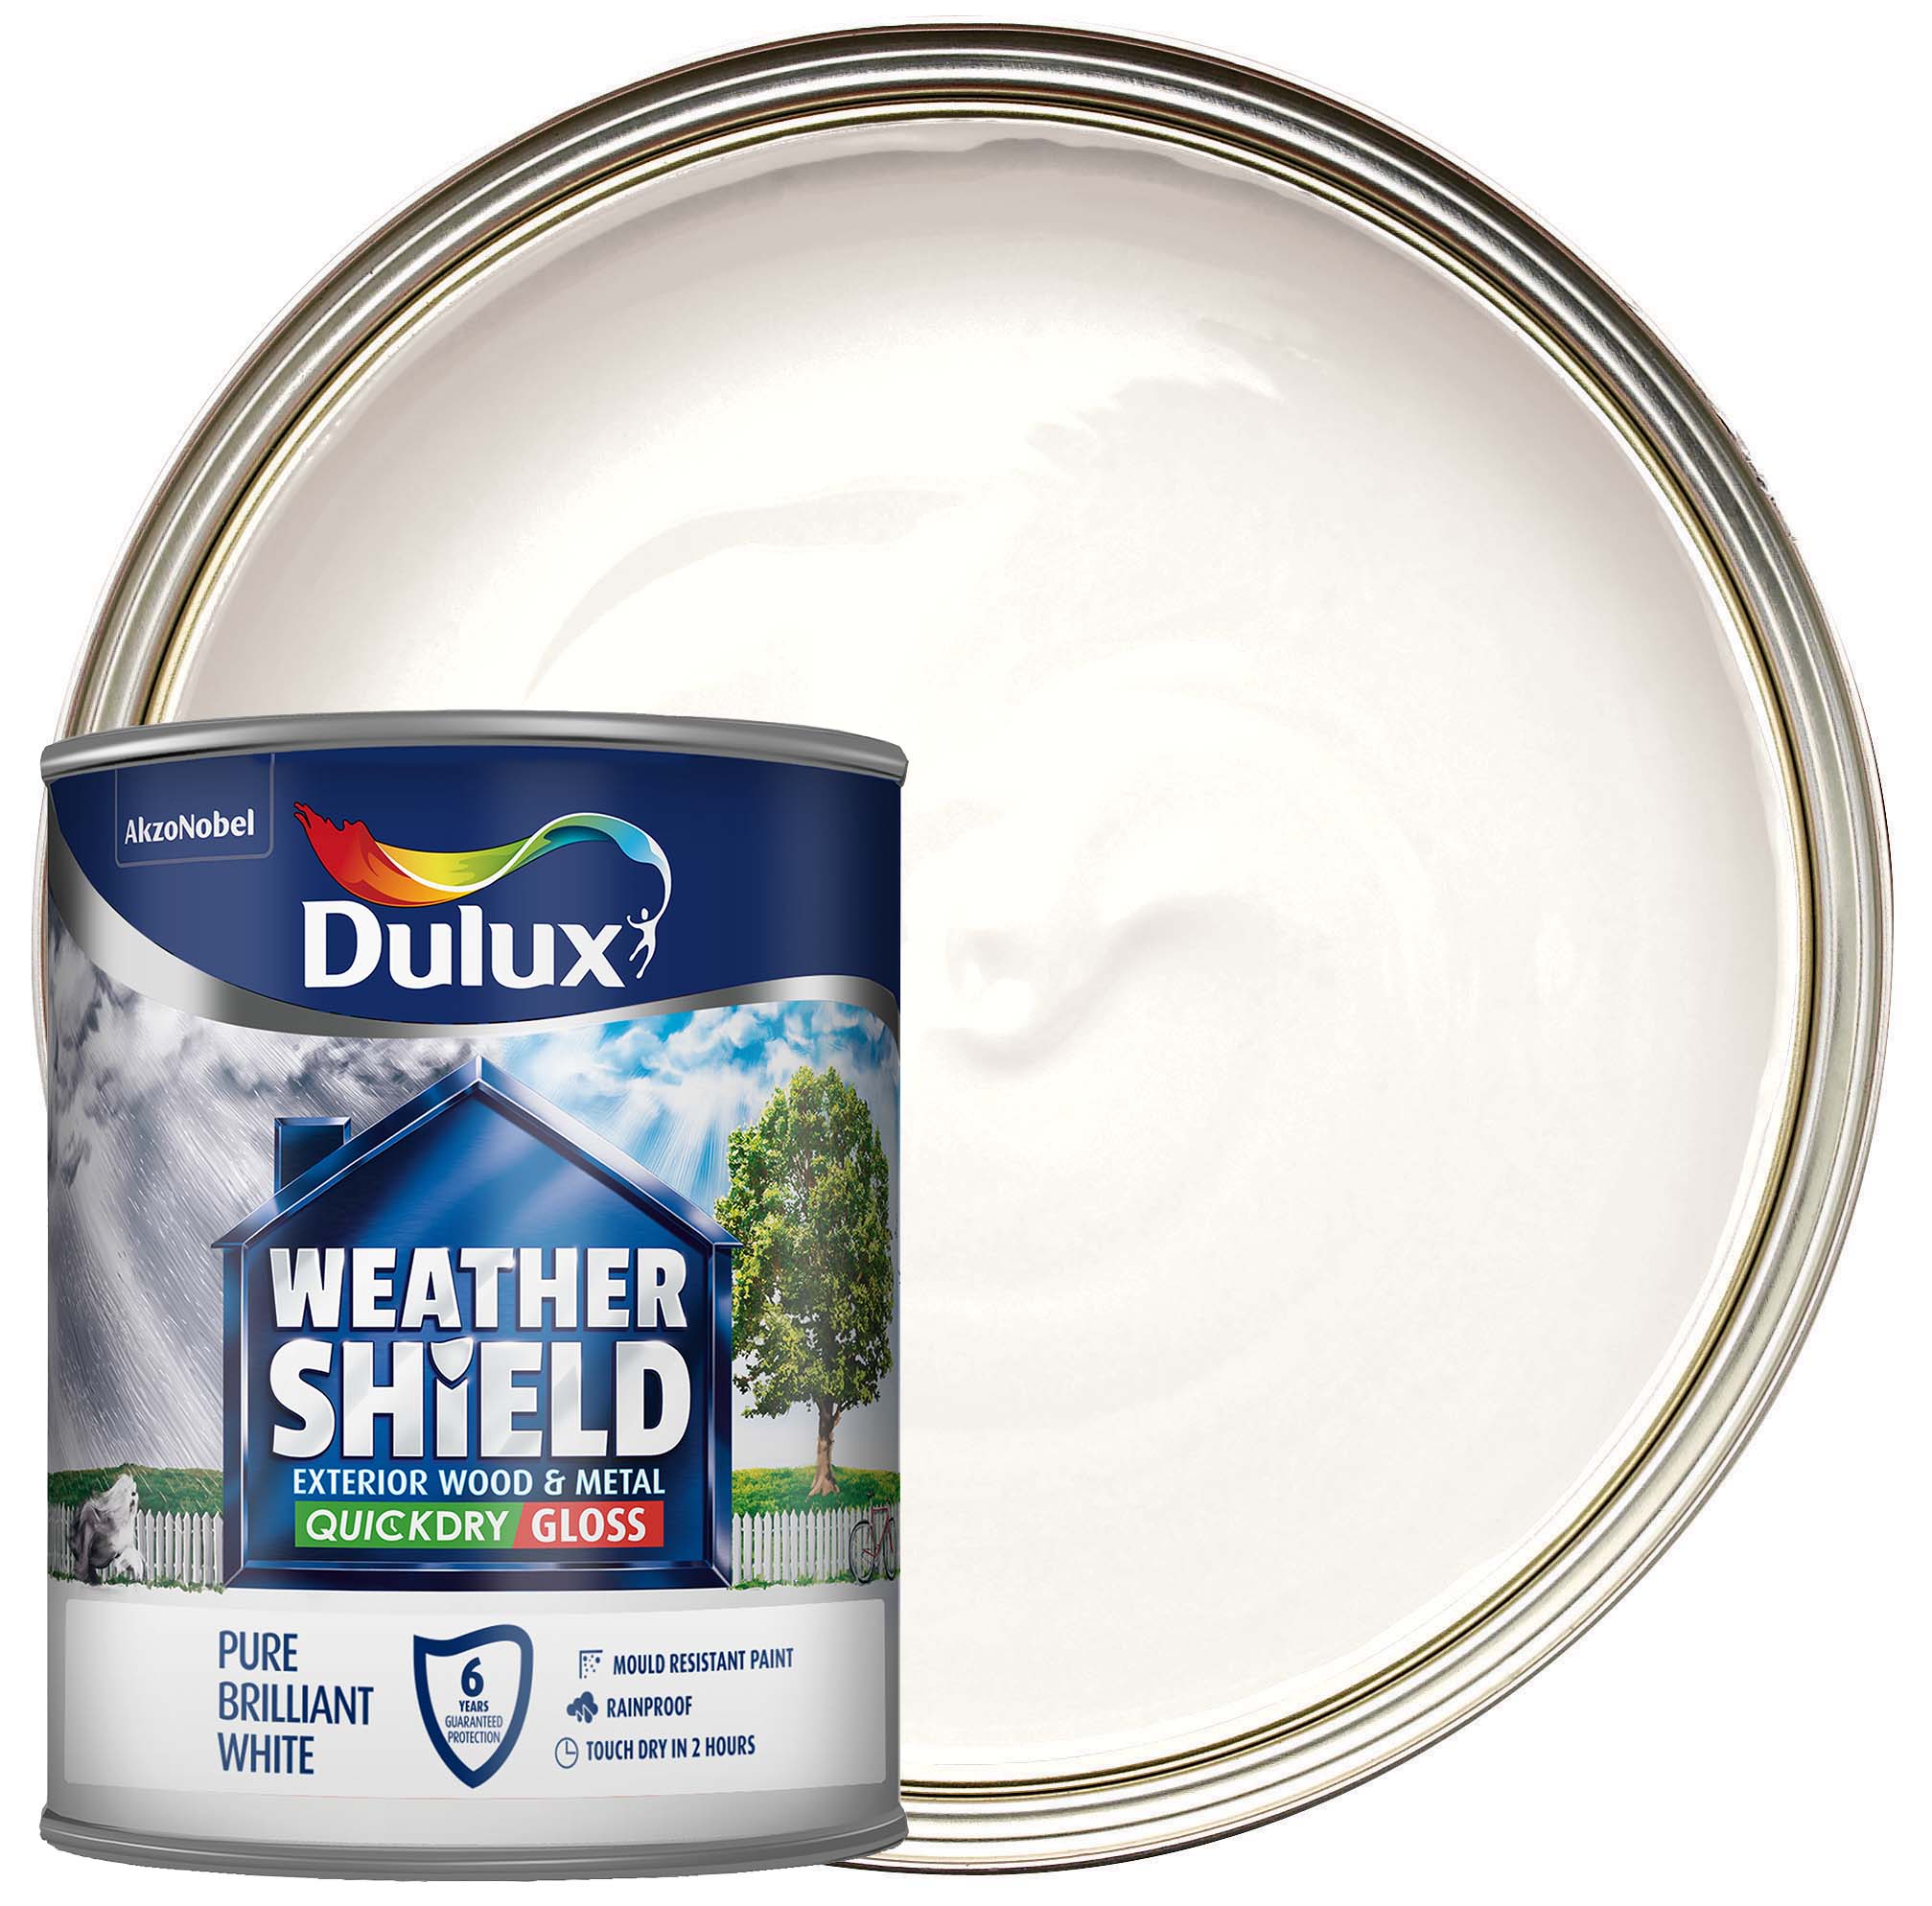 Image of Dulux Weathershield Quick Dry Gloss Paint - Pure Brilliant White - 750ml